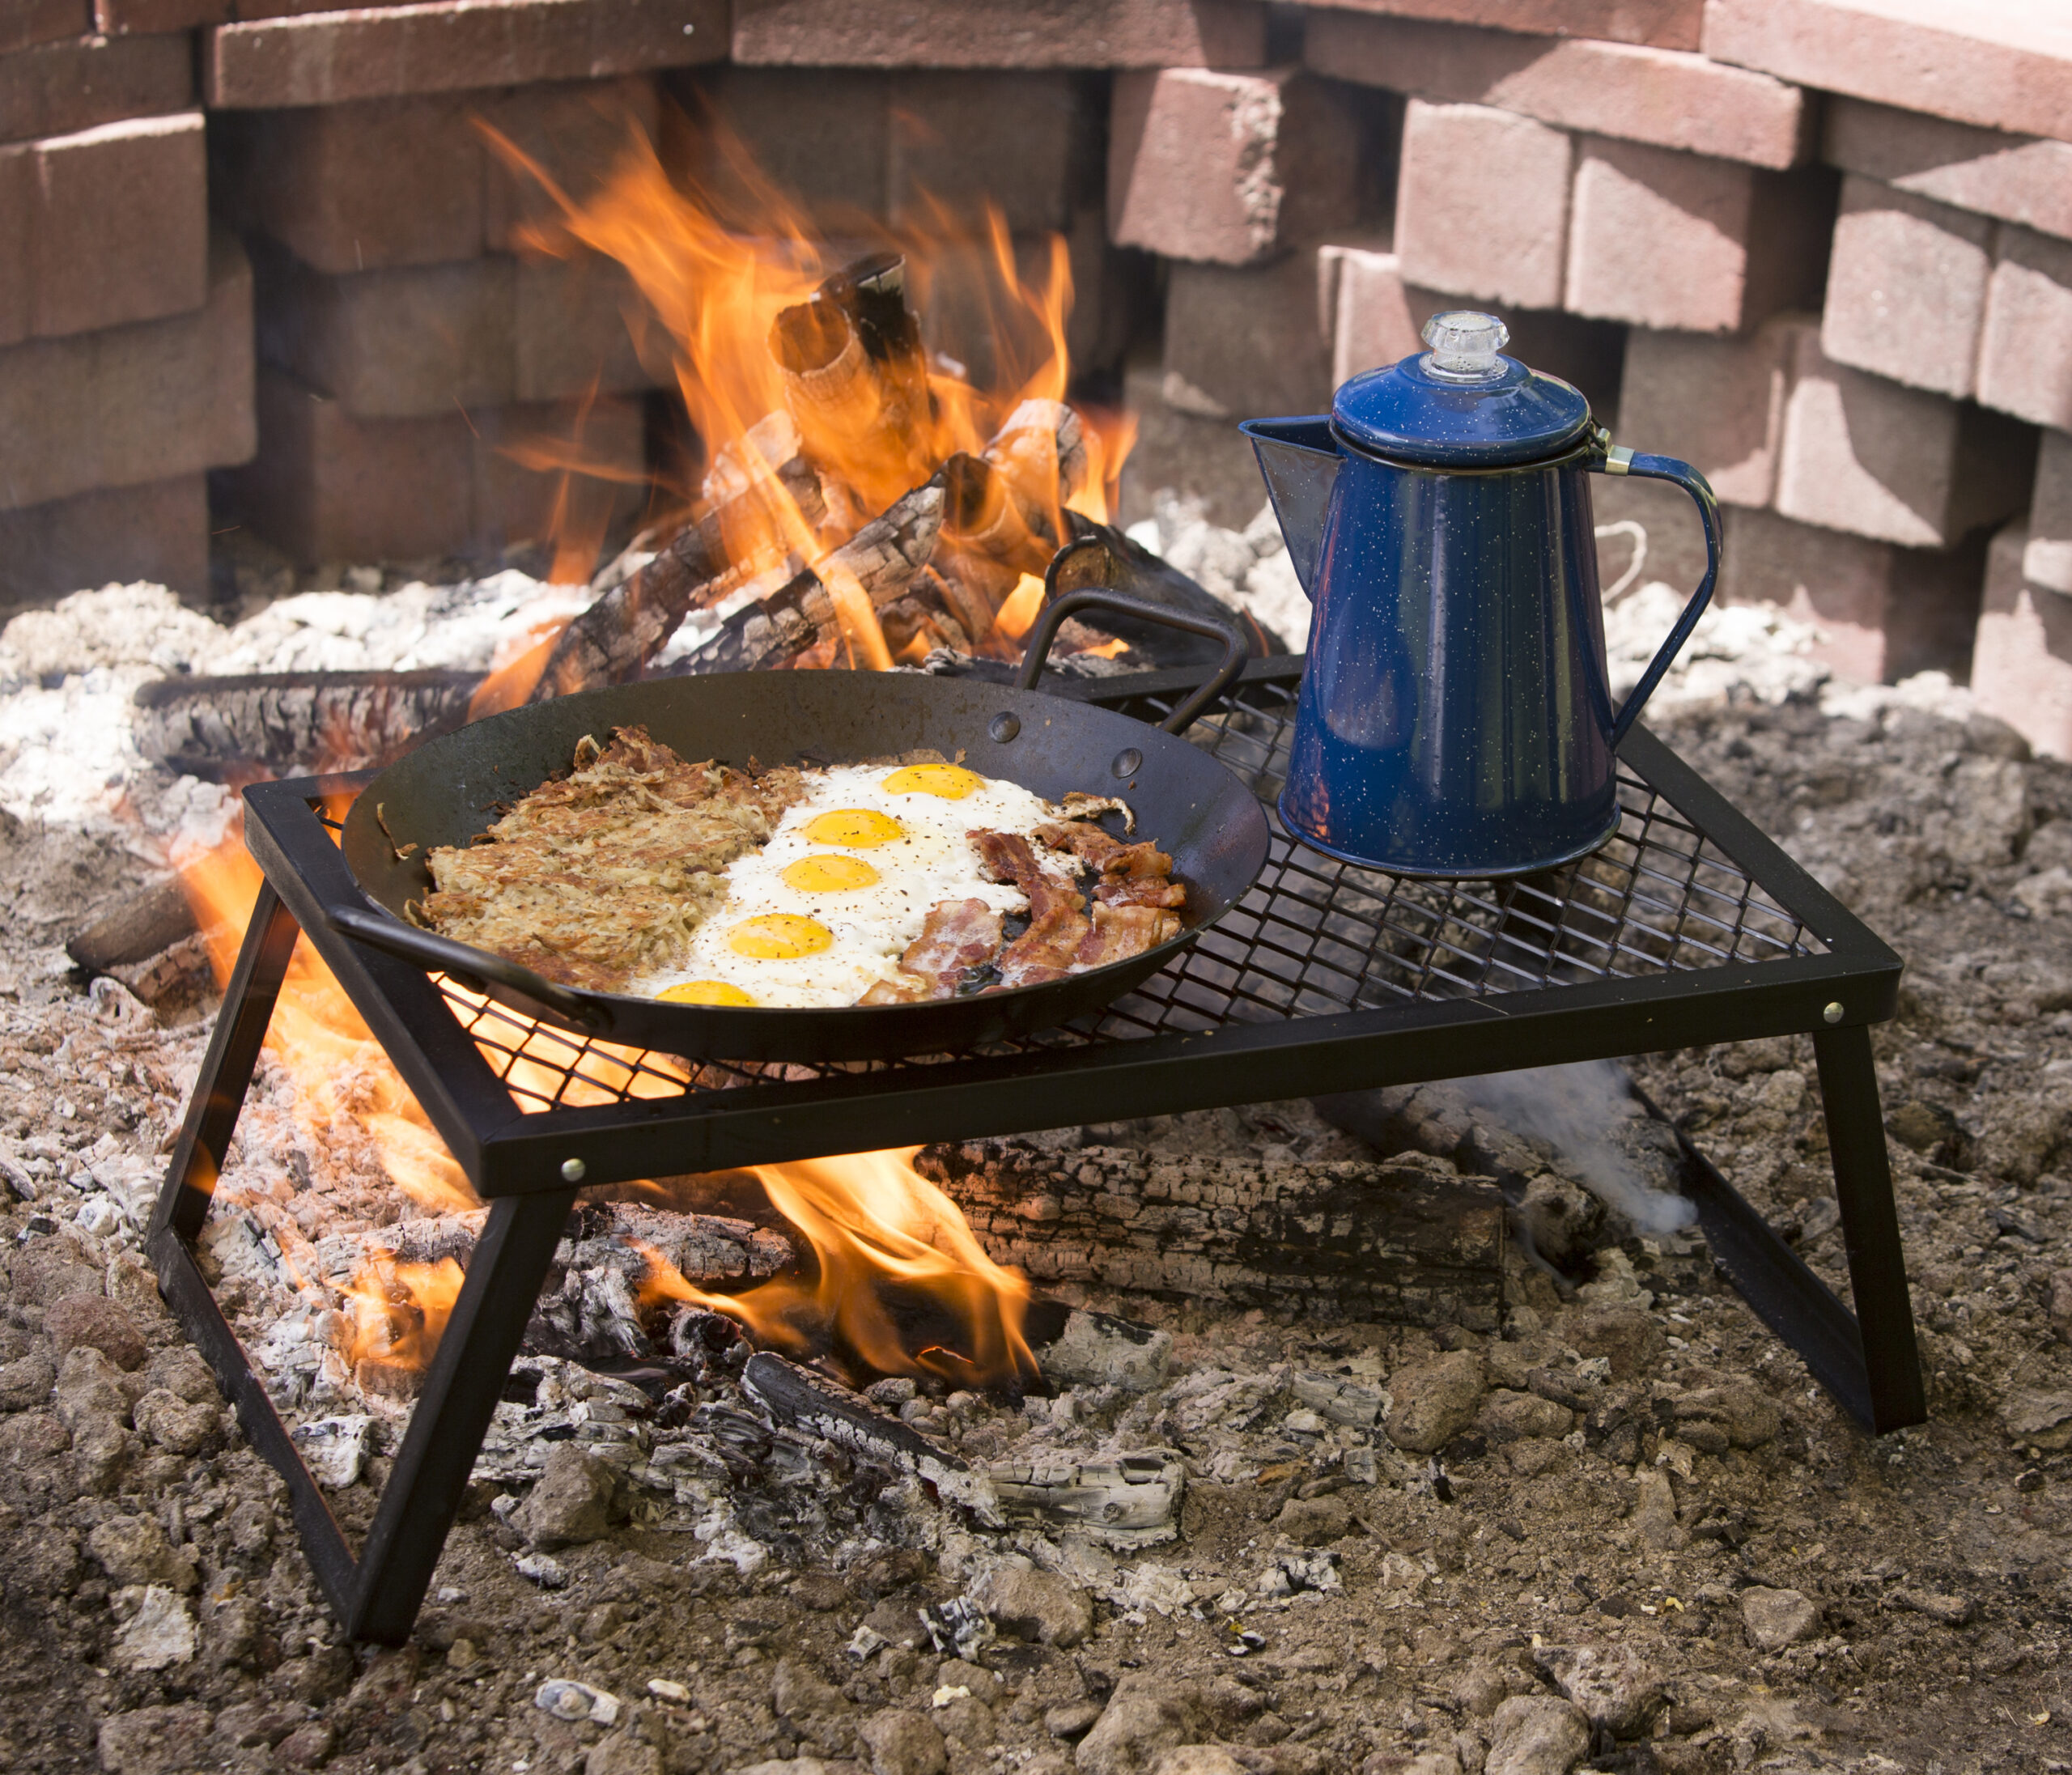 Lodge Cast Iron: Great Camping Gear and Best Fall Recipes - The RV